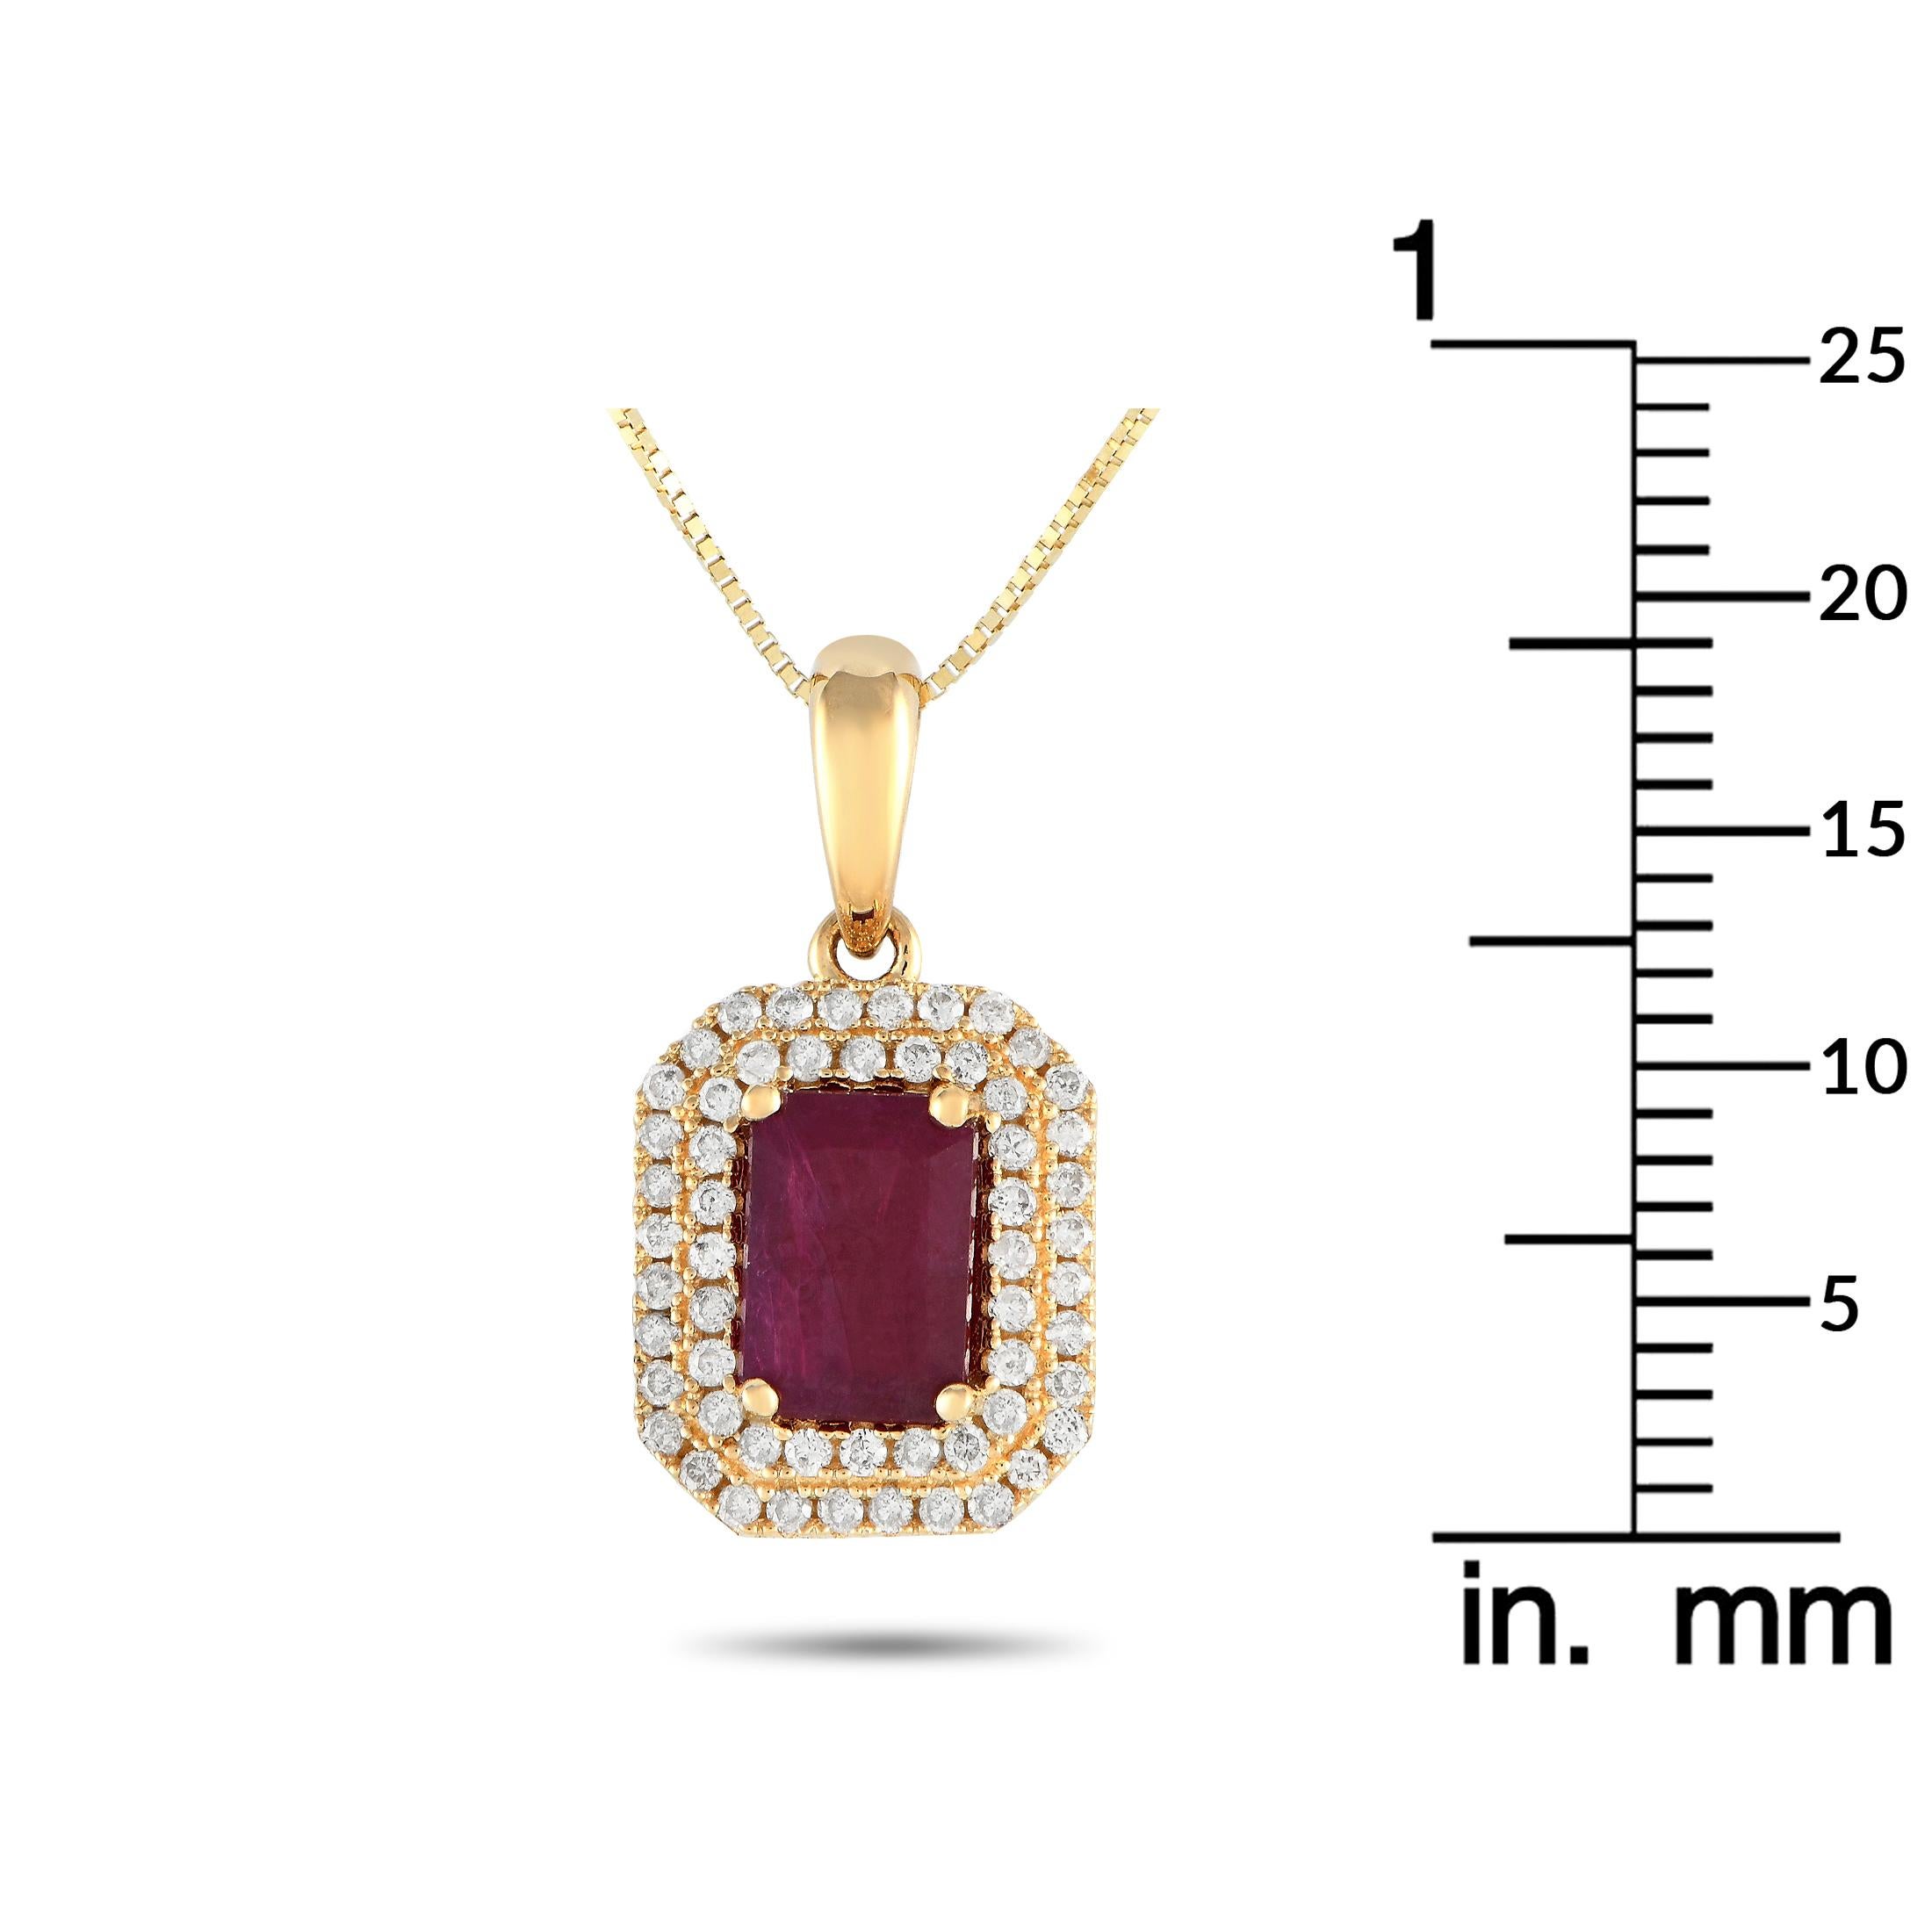 LB Exclusive 14K Yellow Gold 0.24ct Diamond & Ruby Pendant Necklace PD4-15905YRU In New Condition For Sale In Southampton, PA